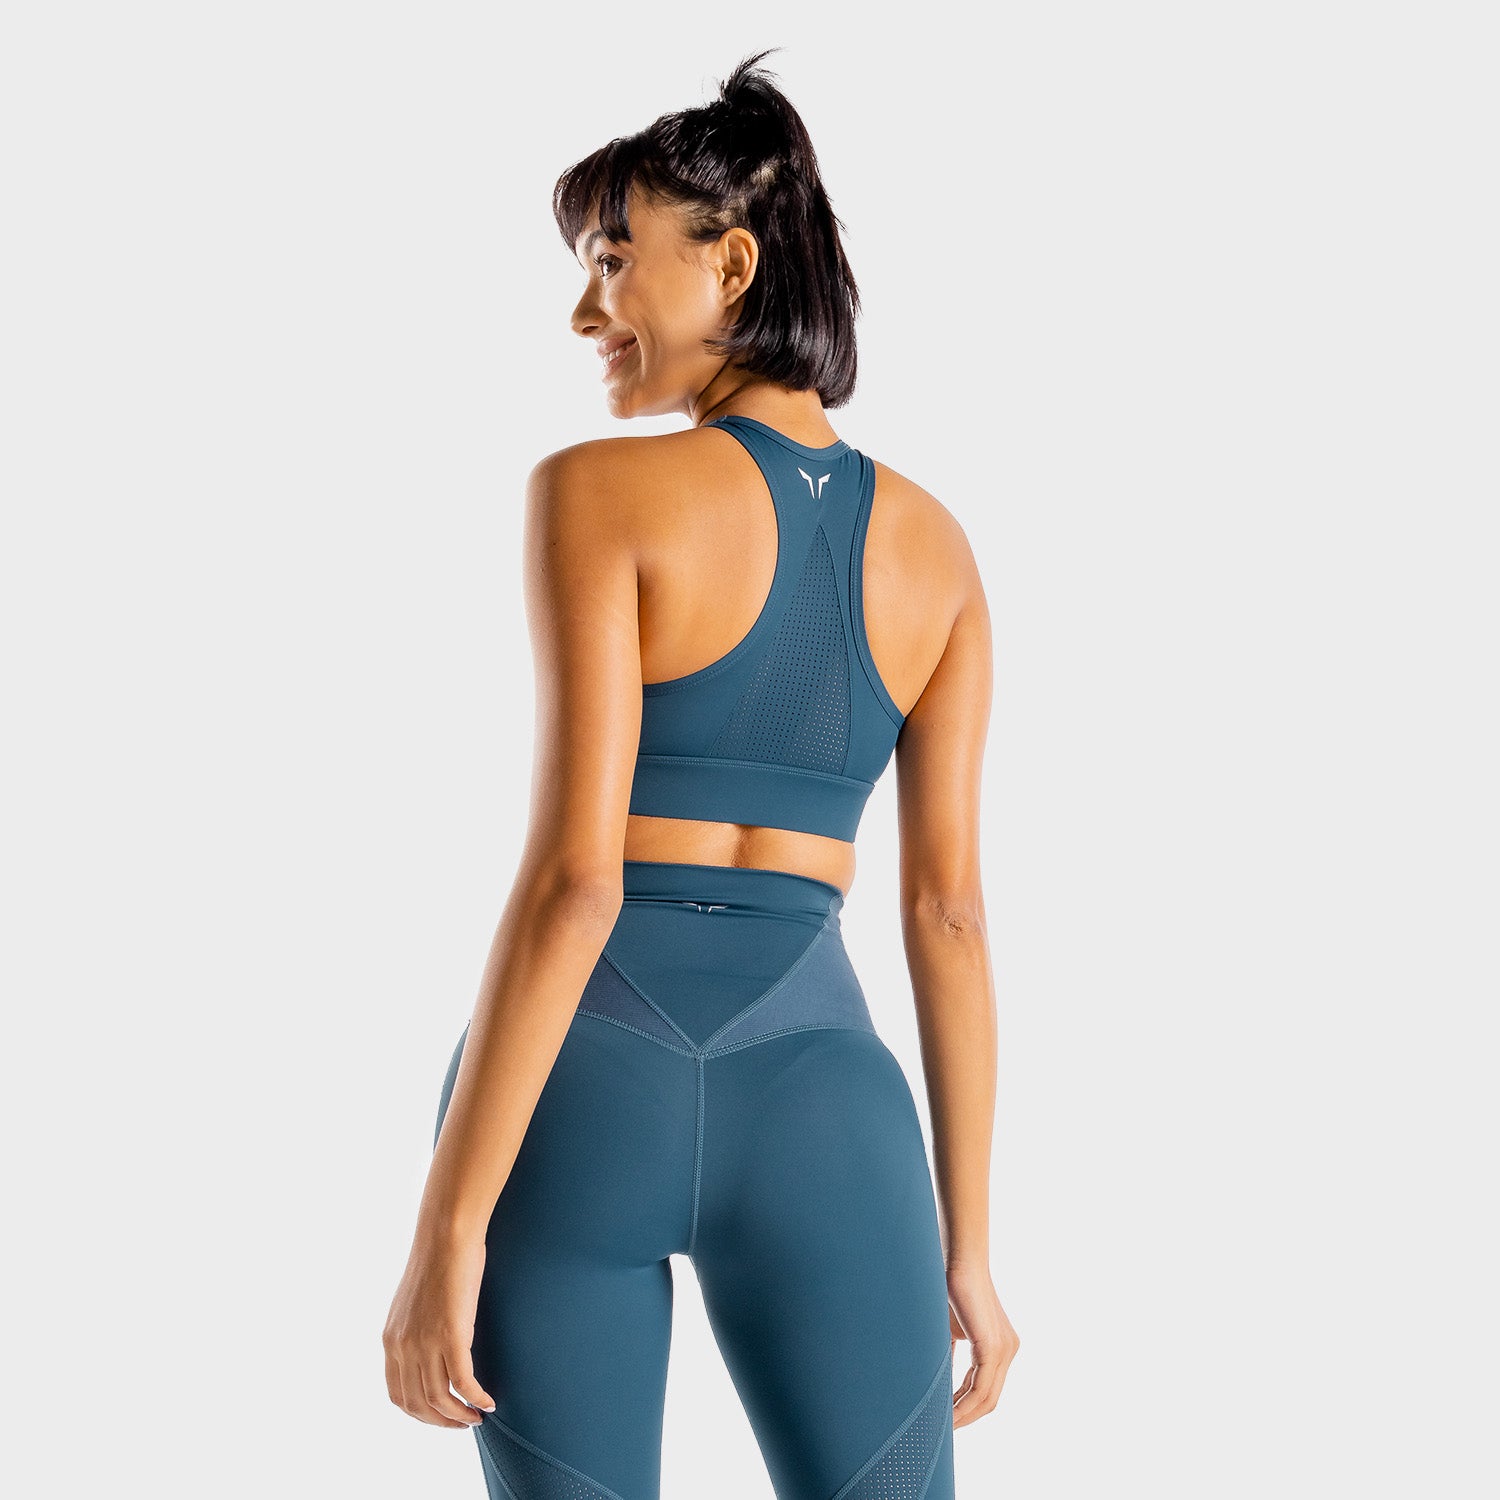 squatwolf-workout-clothes-wolf-sports-bra-blue-sports-bra-for-gym